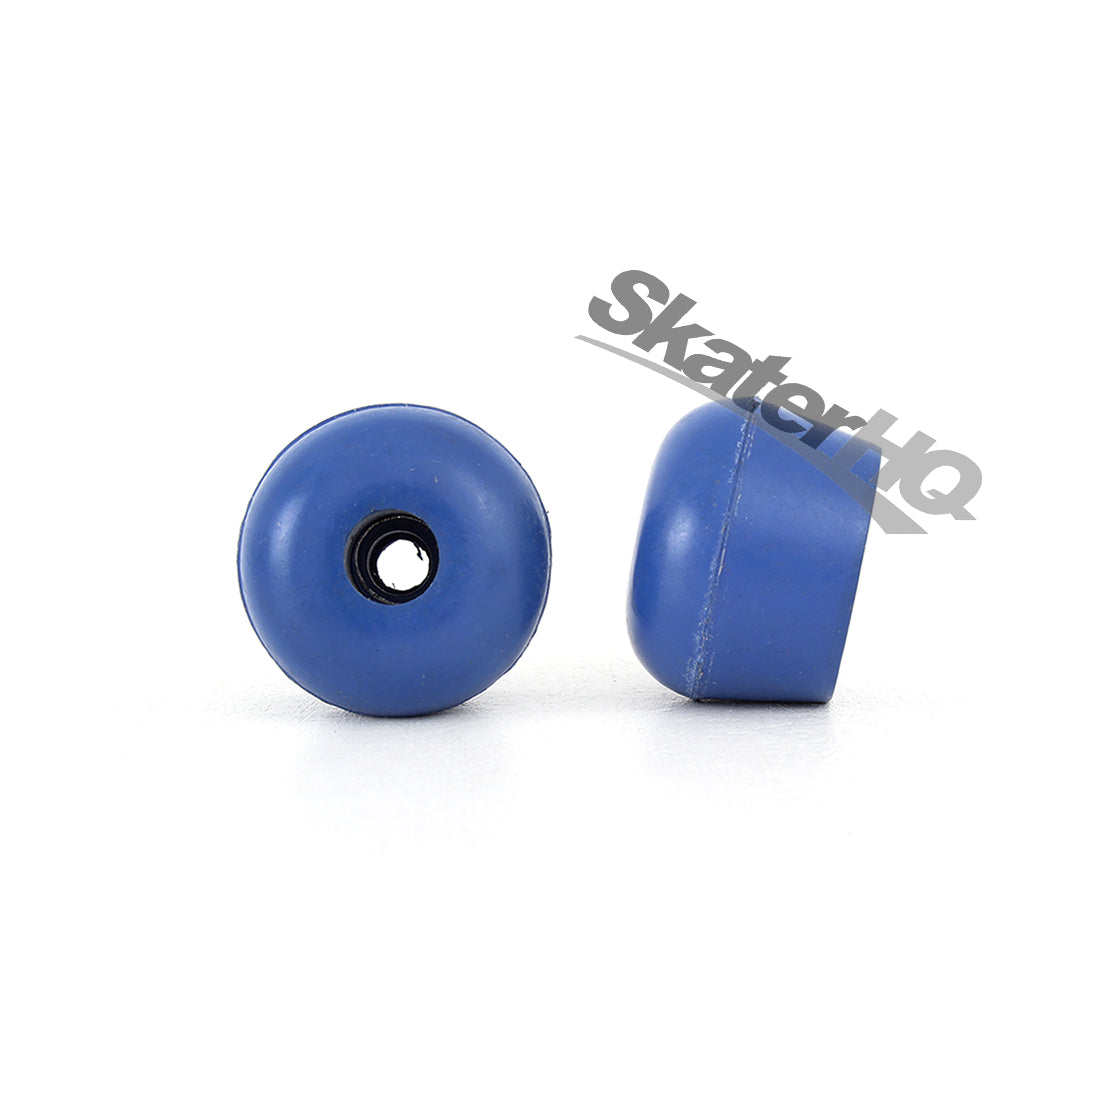 Sure-Grip Dance Toe Stops X Small PAIR - Blue Roller Skate Hardware and Parts